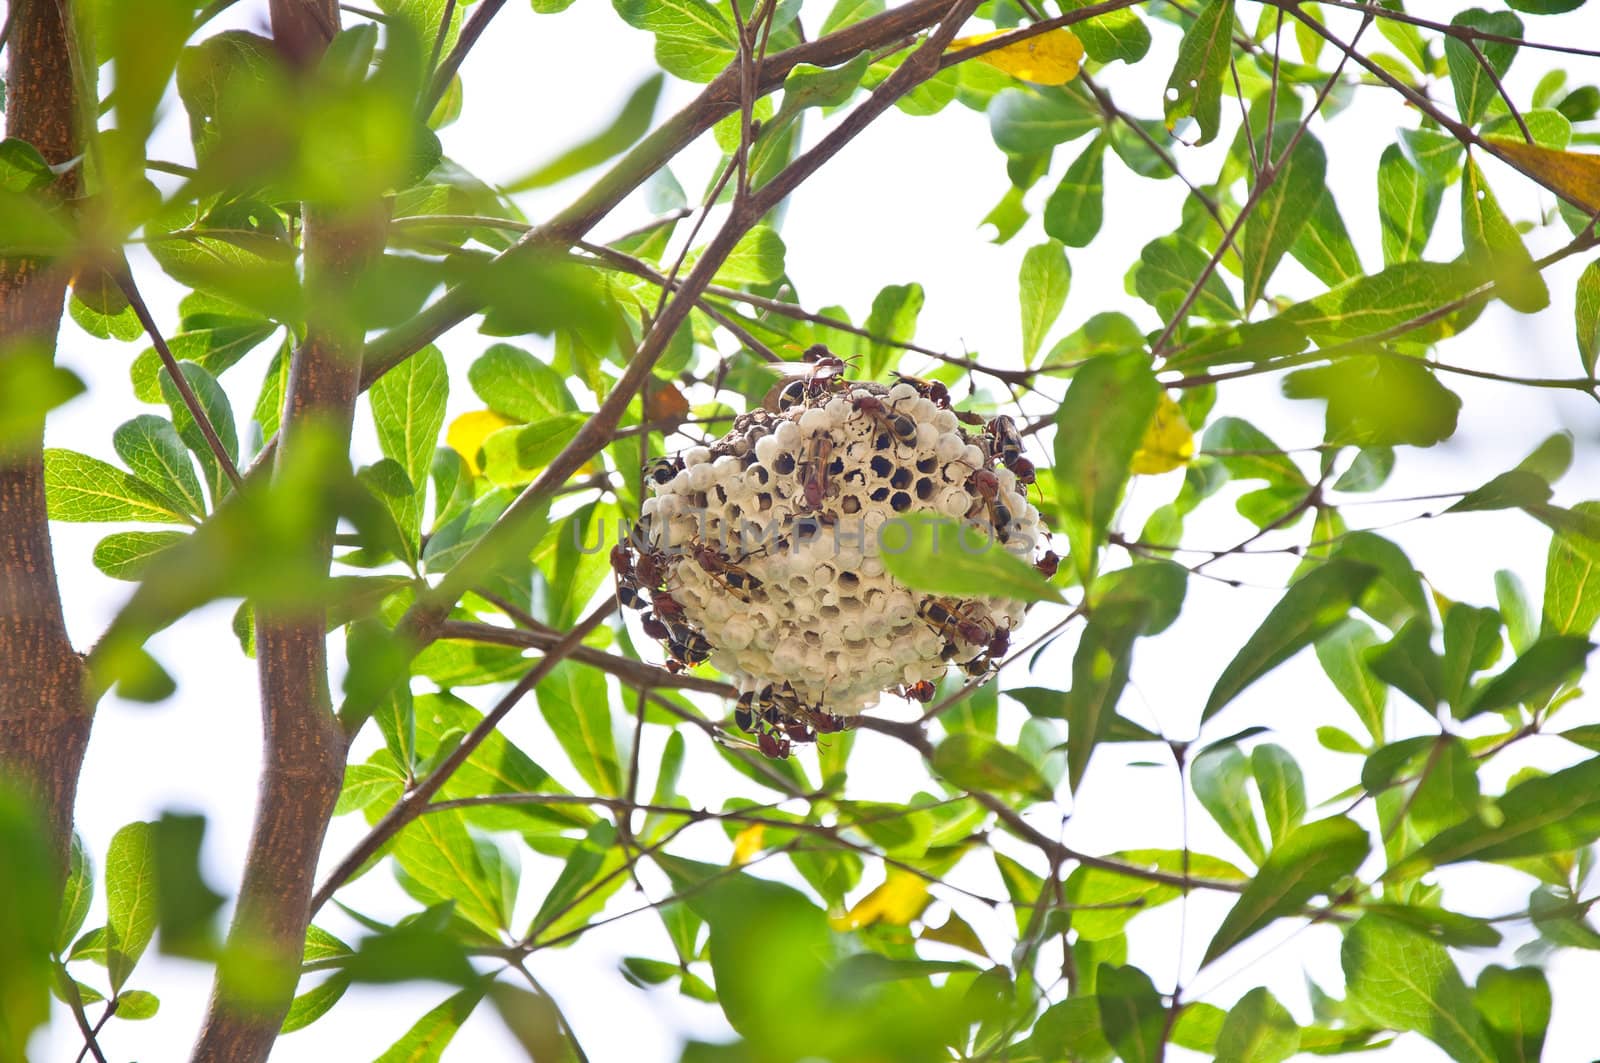 Wasp hive clinging to a tree by tore2527